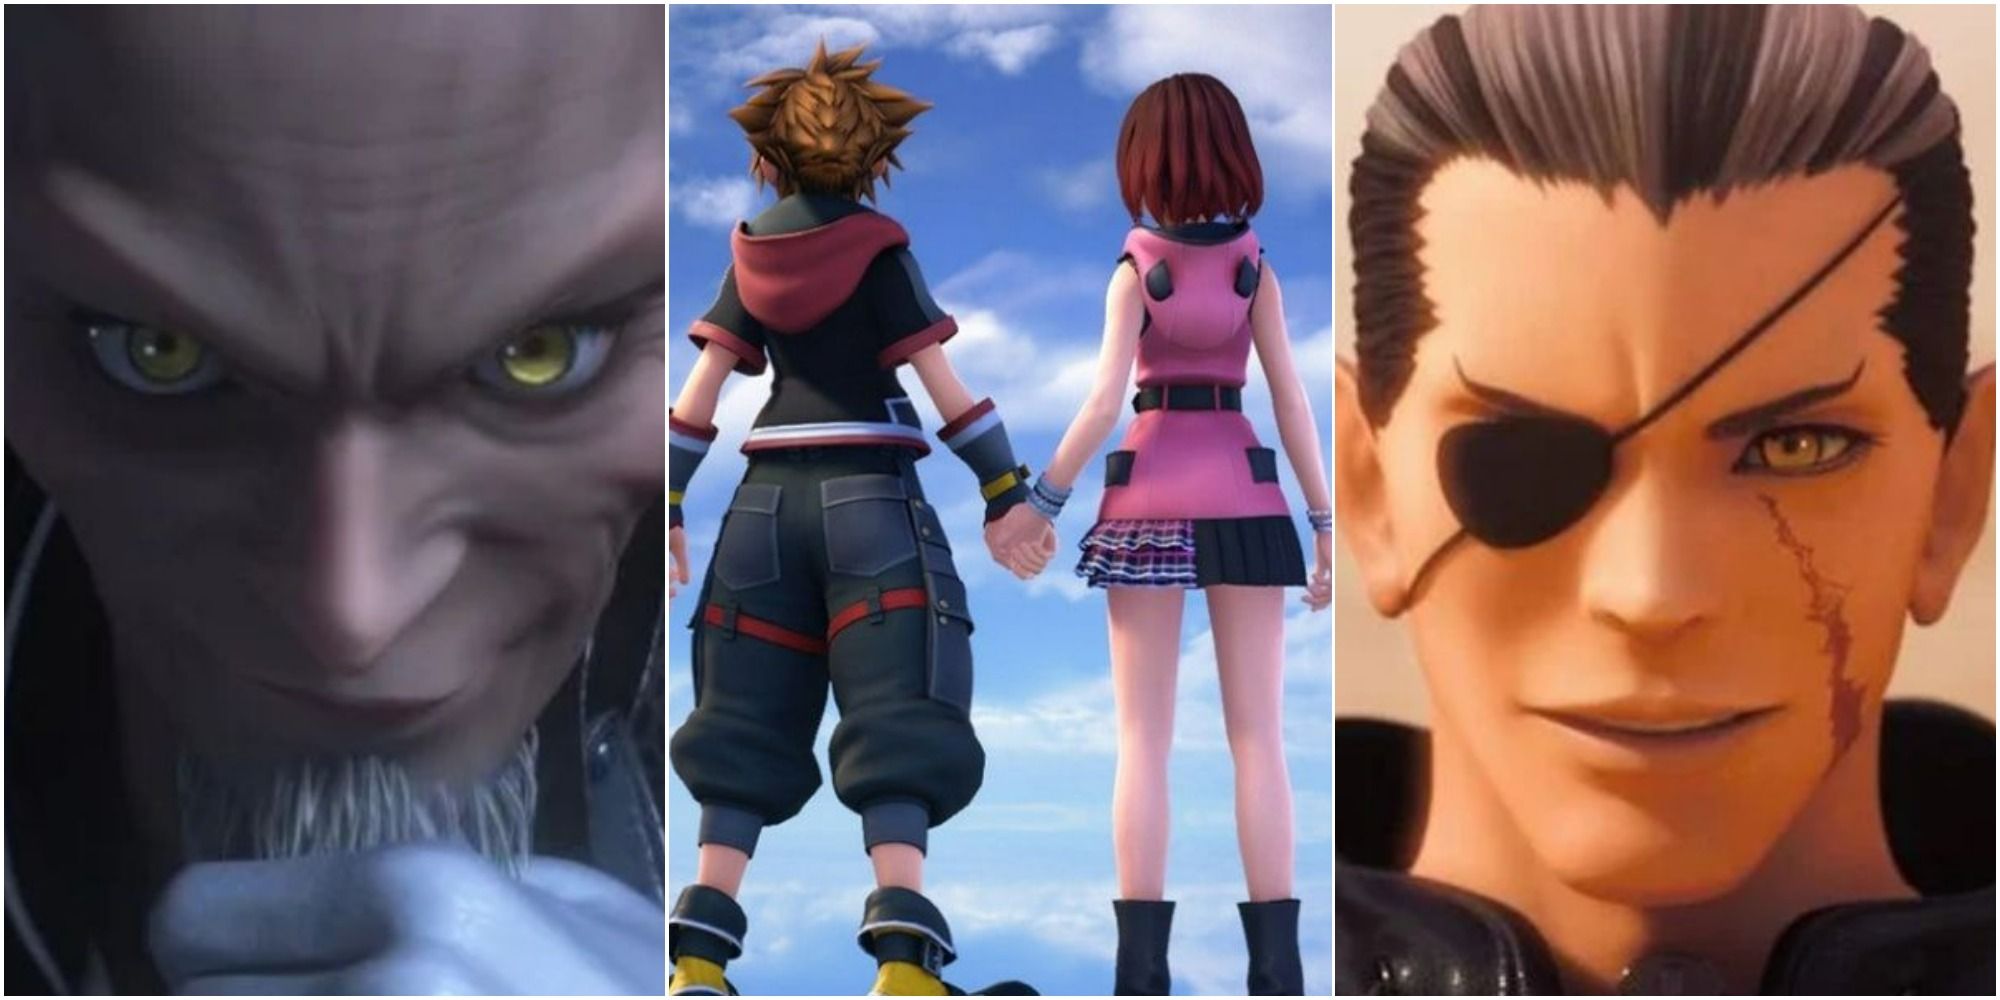 Kingdom Hearts III Review: A Charming Finale to Disney and Square